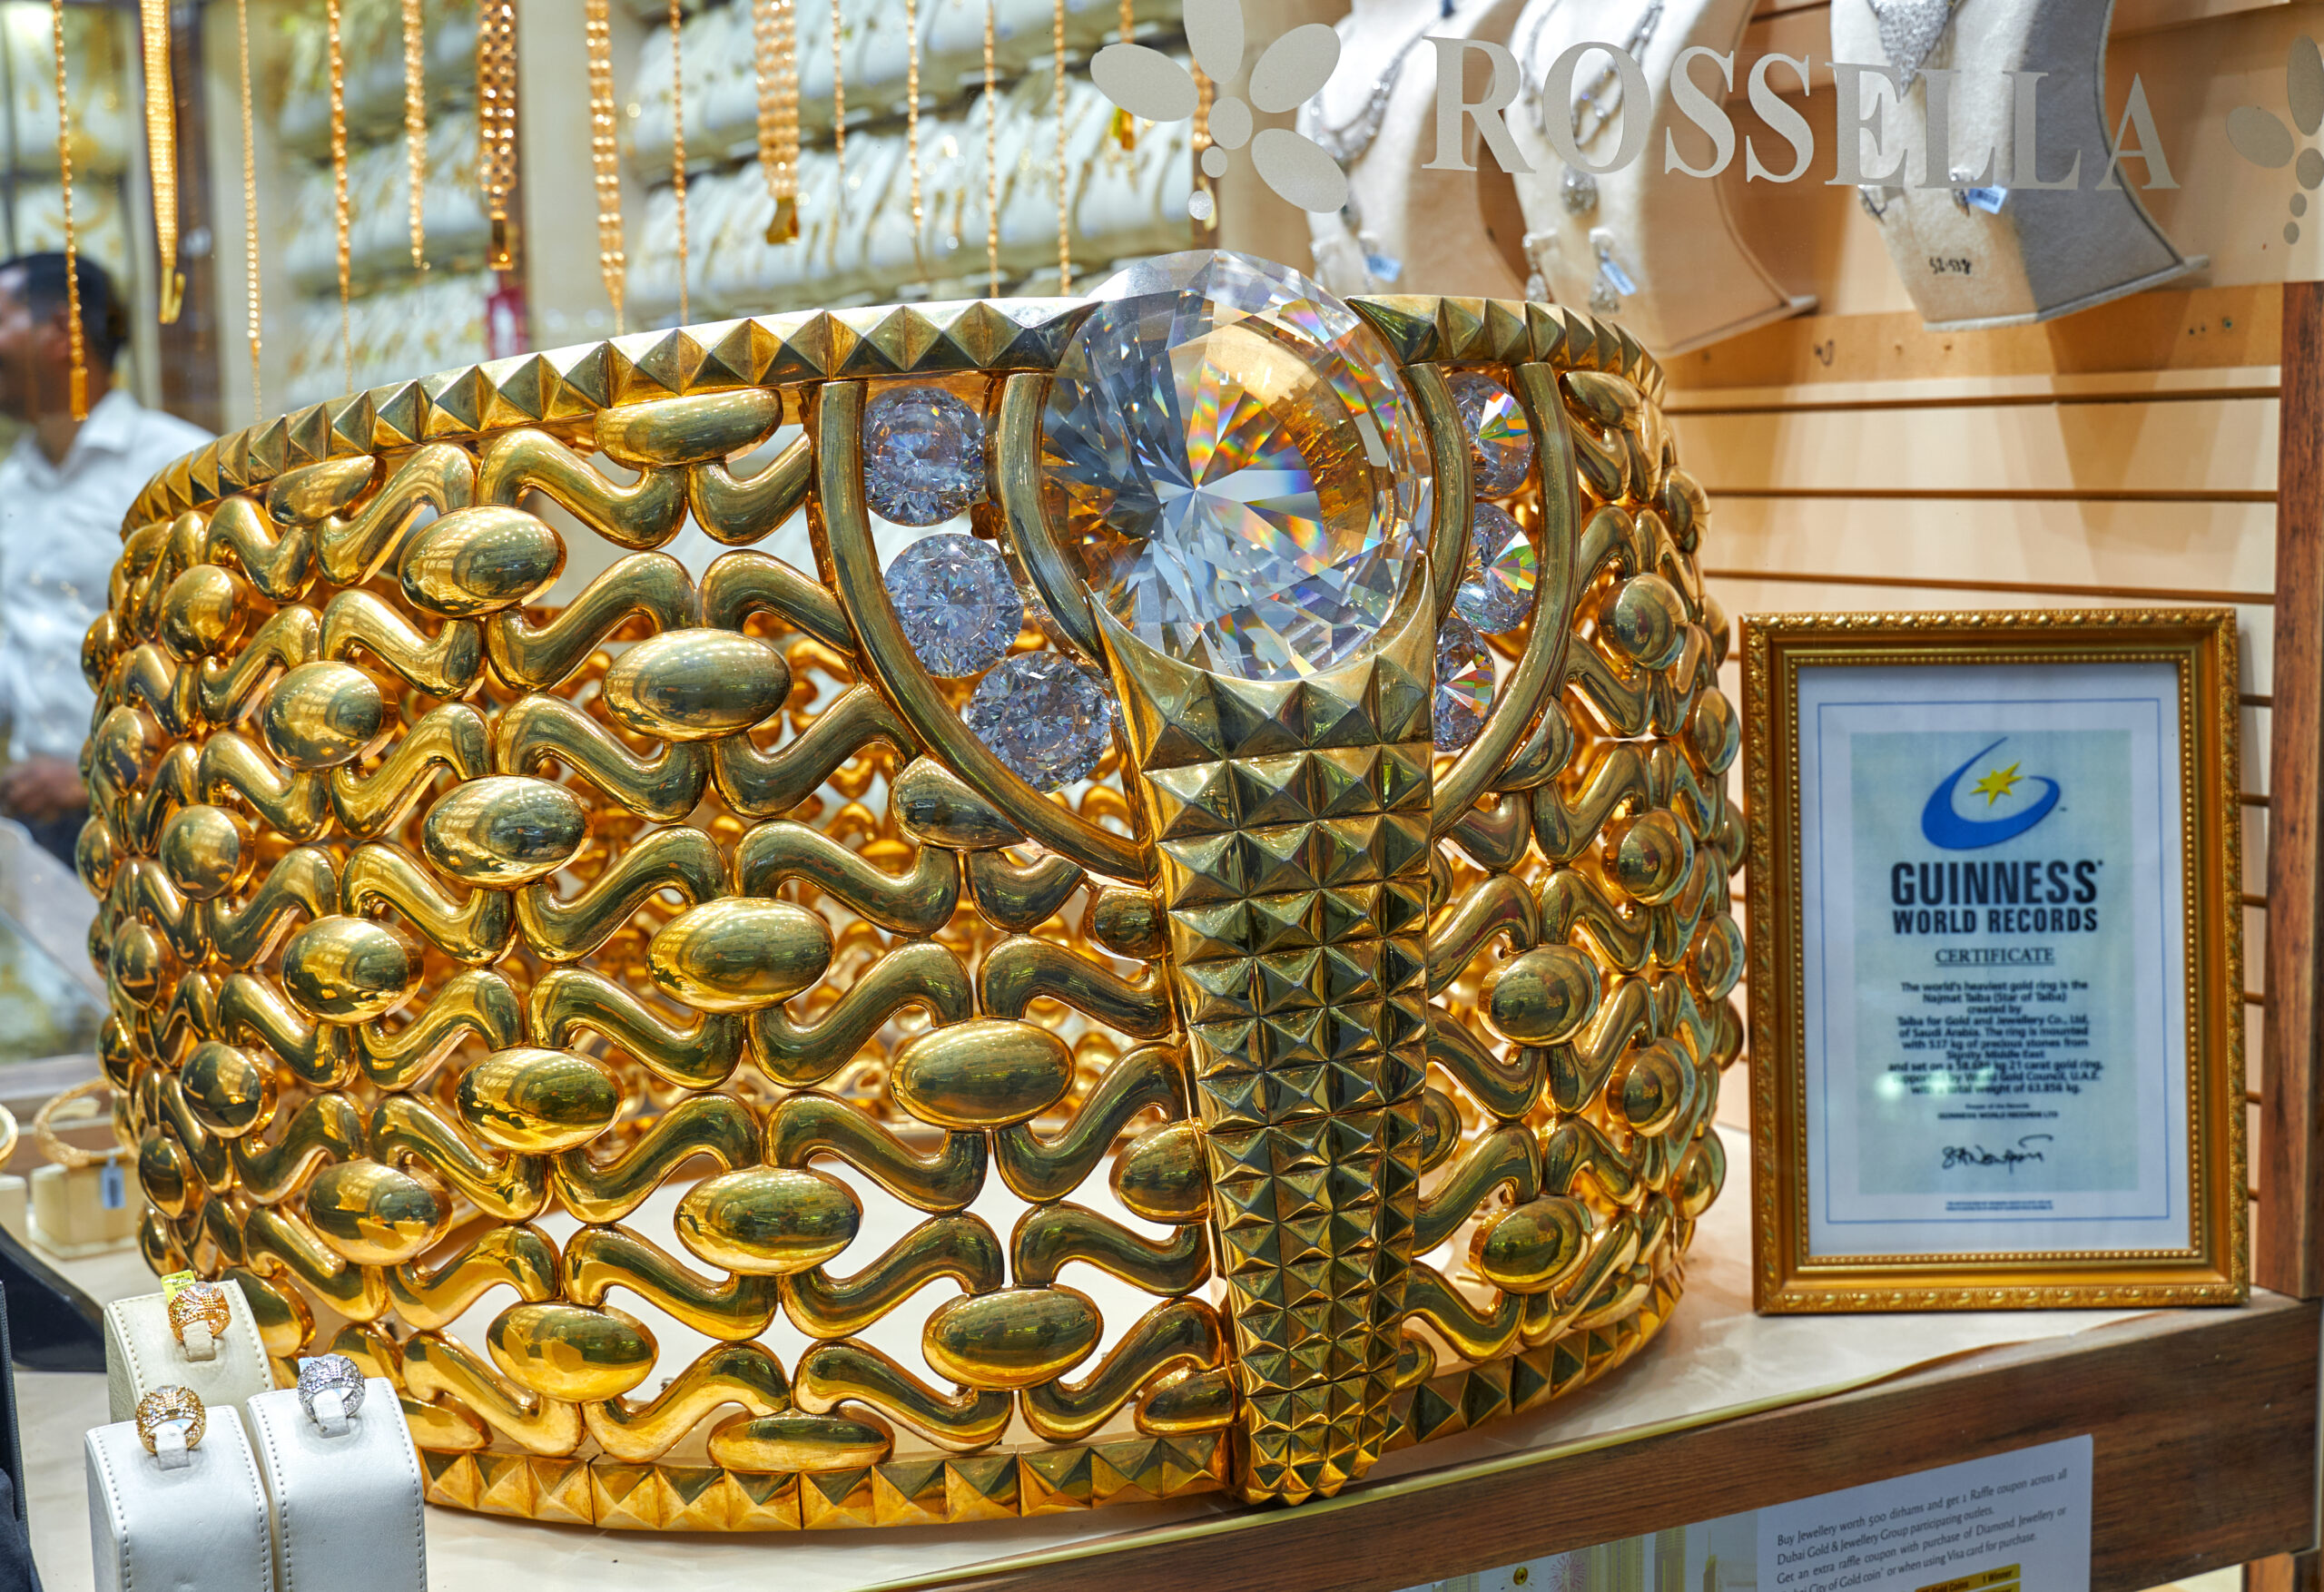 Dubai Gold Souk - Largest gold ring in the world